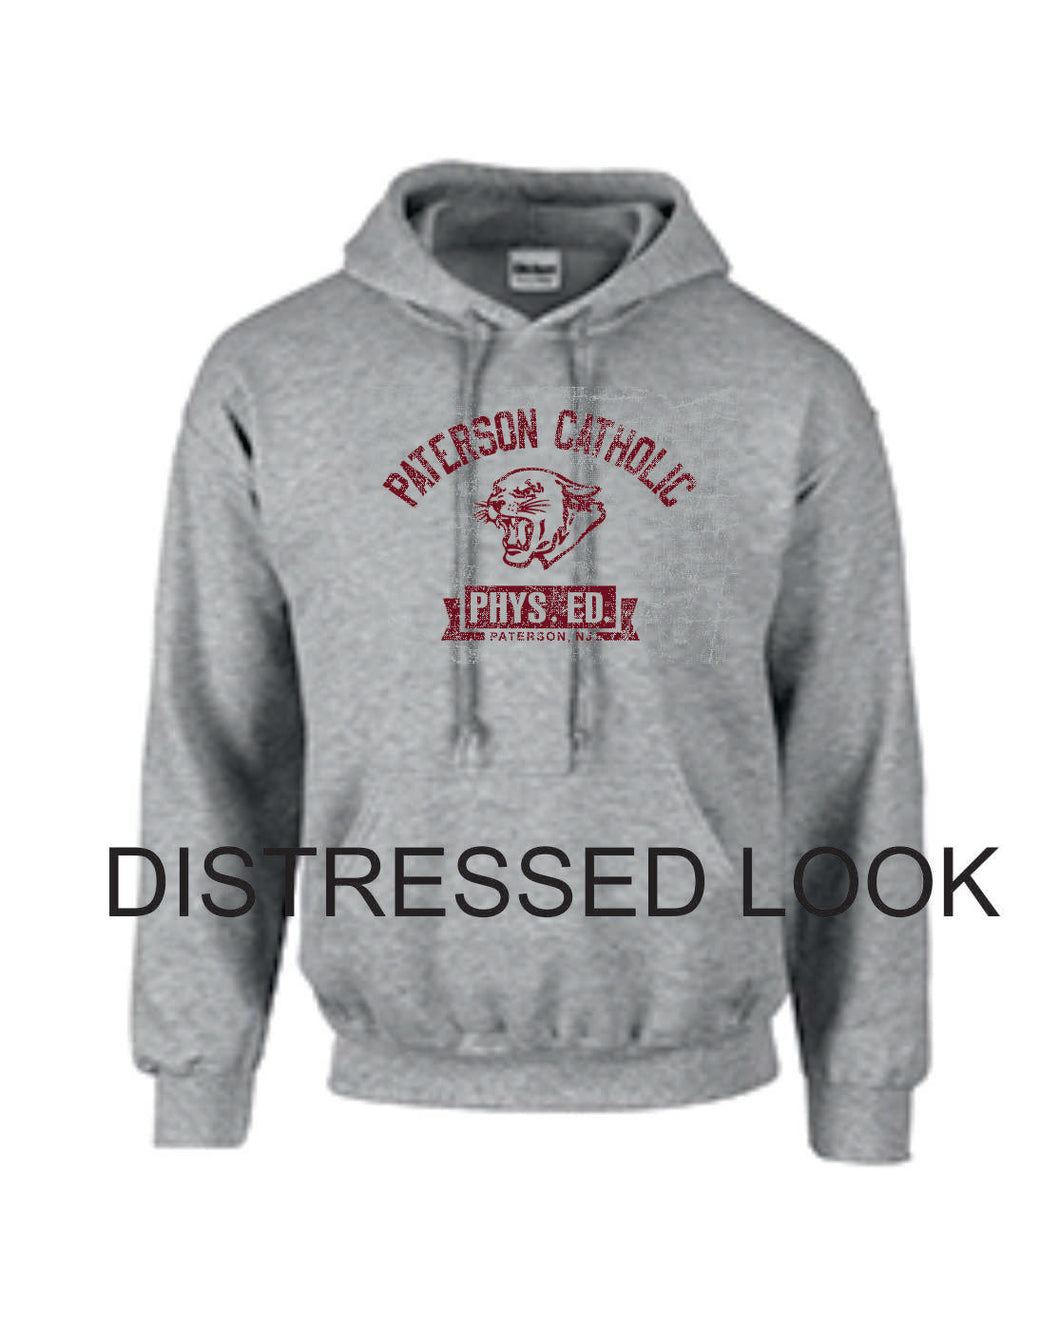 Paterson Catholic, Paterson, NJ COUGARS, GYM HOODED SWEATSHIRT Reproduction FREE SHIPPING in USA